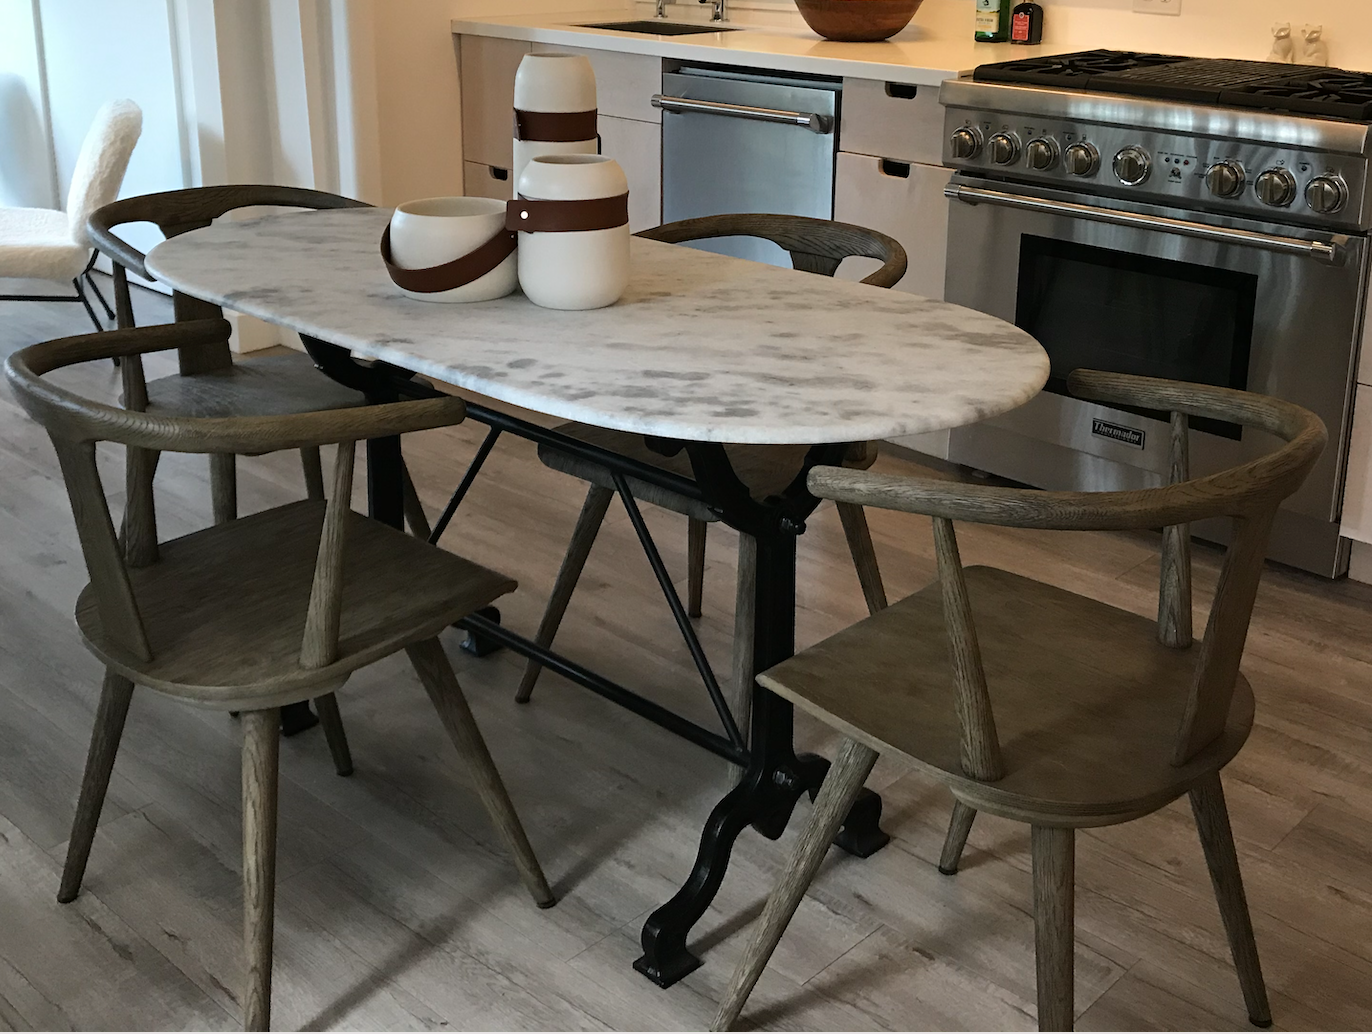 White and gray marble, racetrack shaped table or desk, black iron base